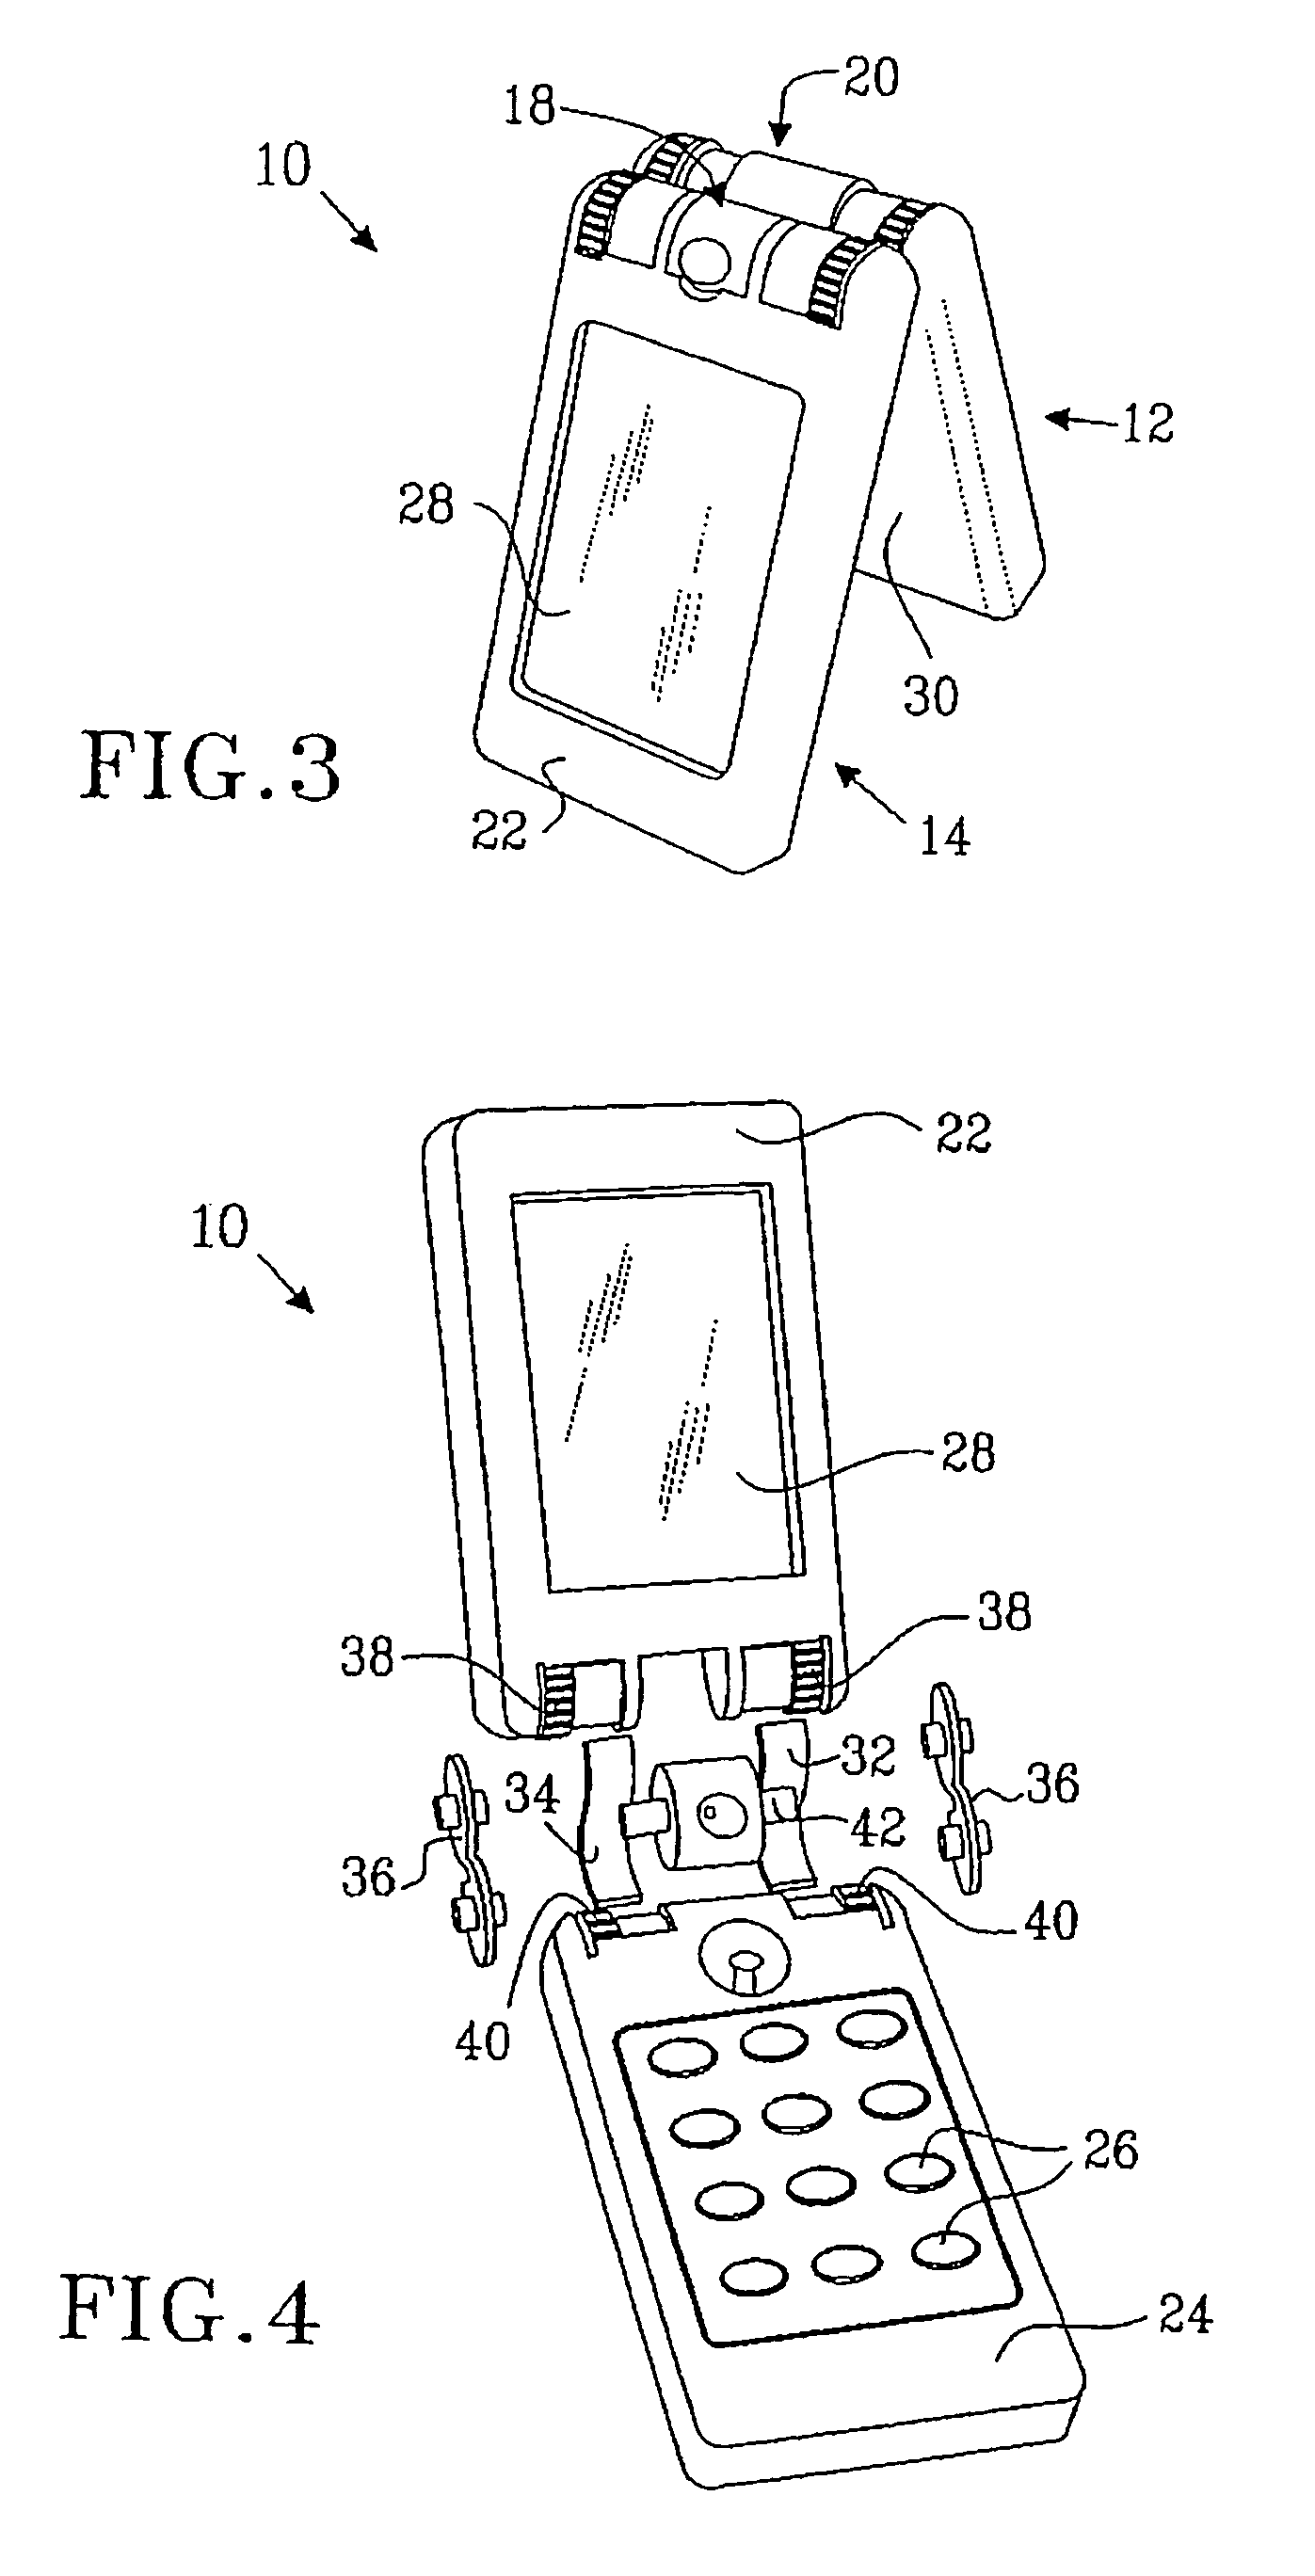 Flexible conductors connected between two parts of a portable electronic device